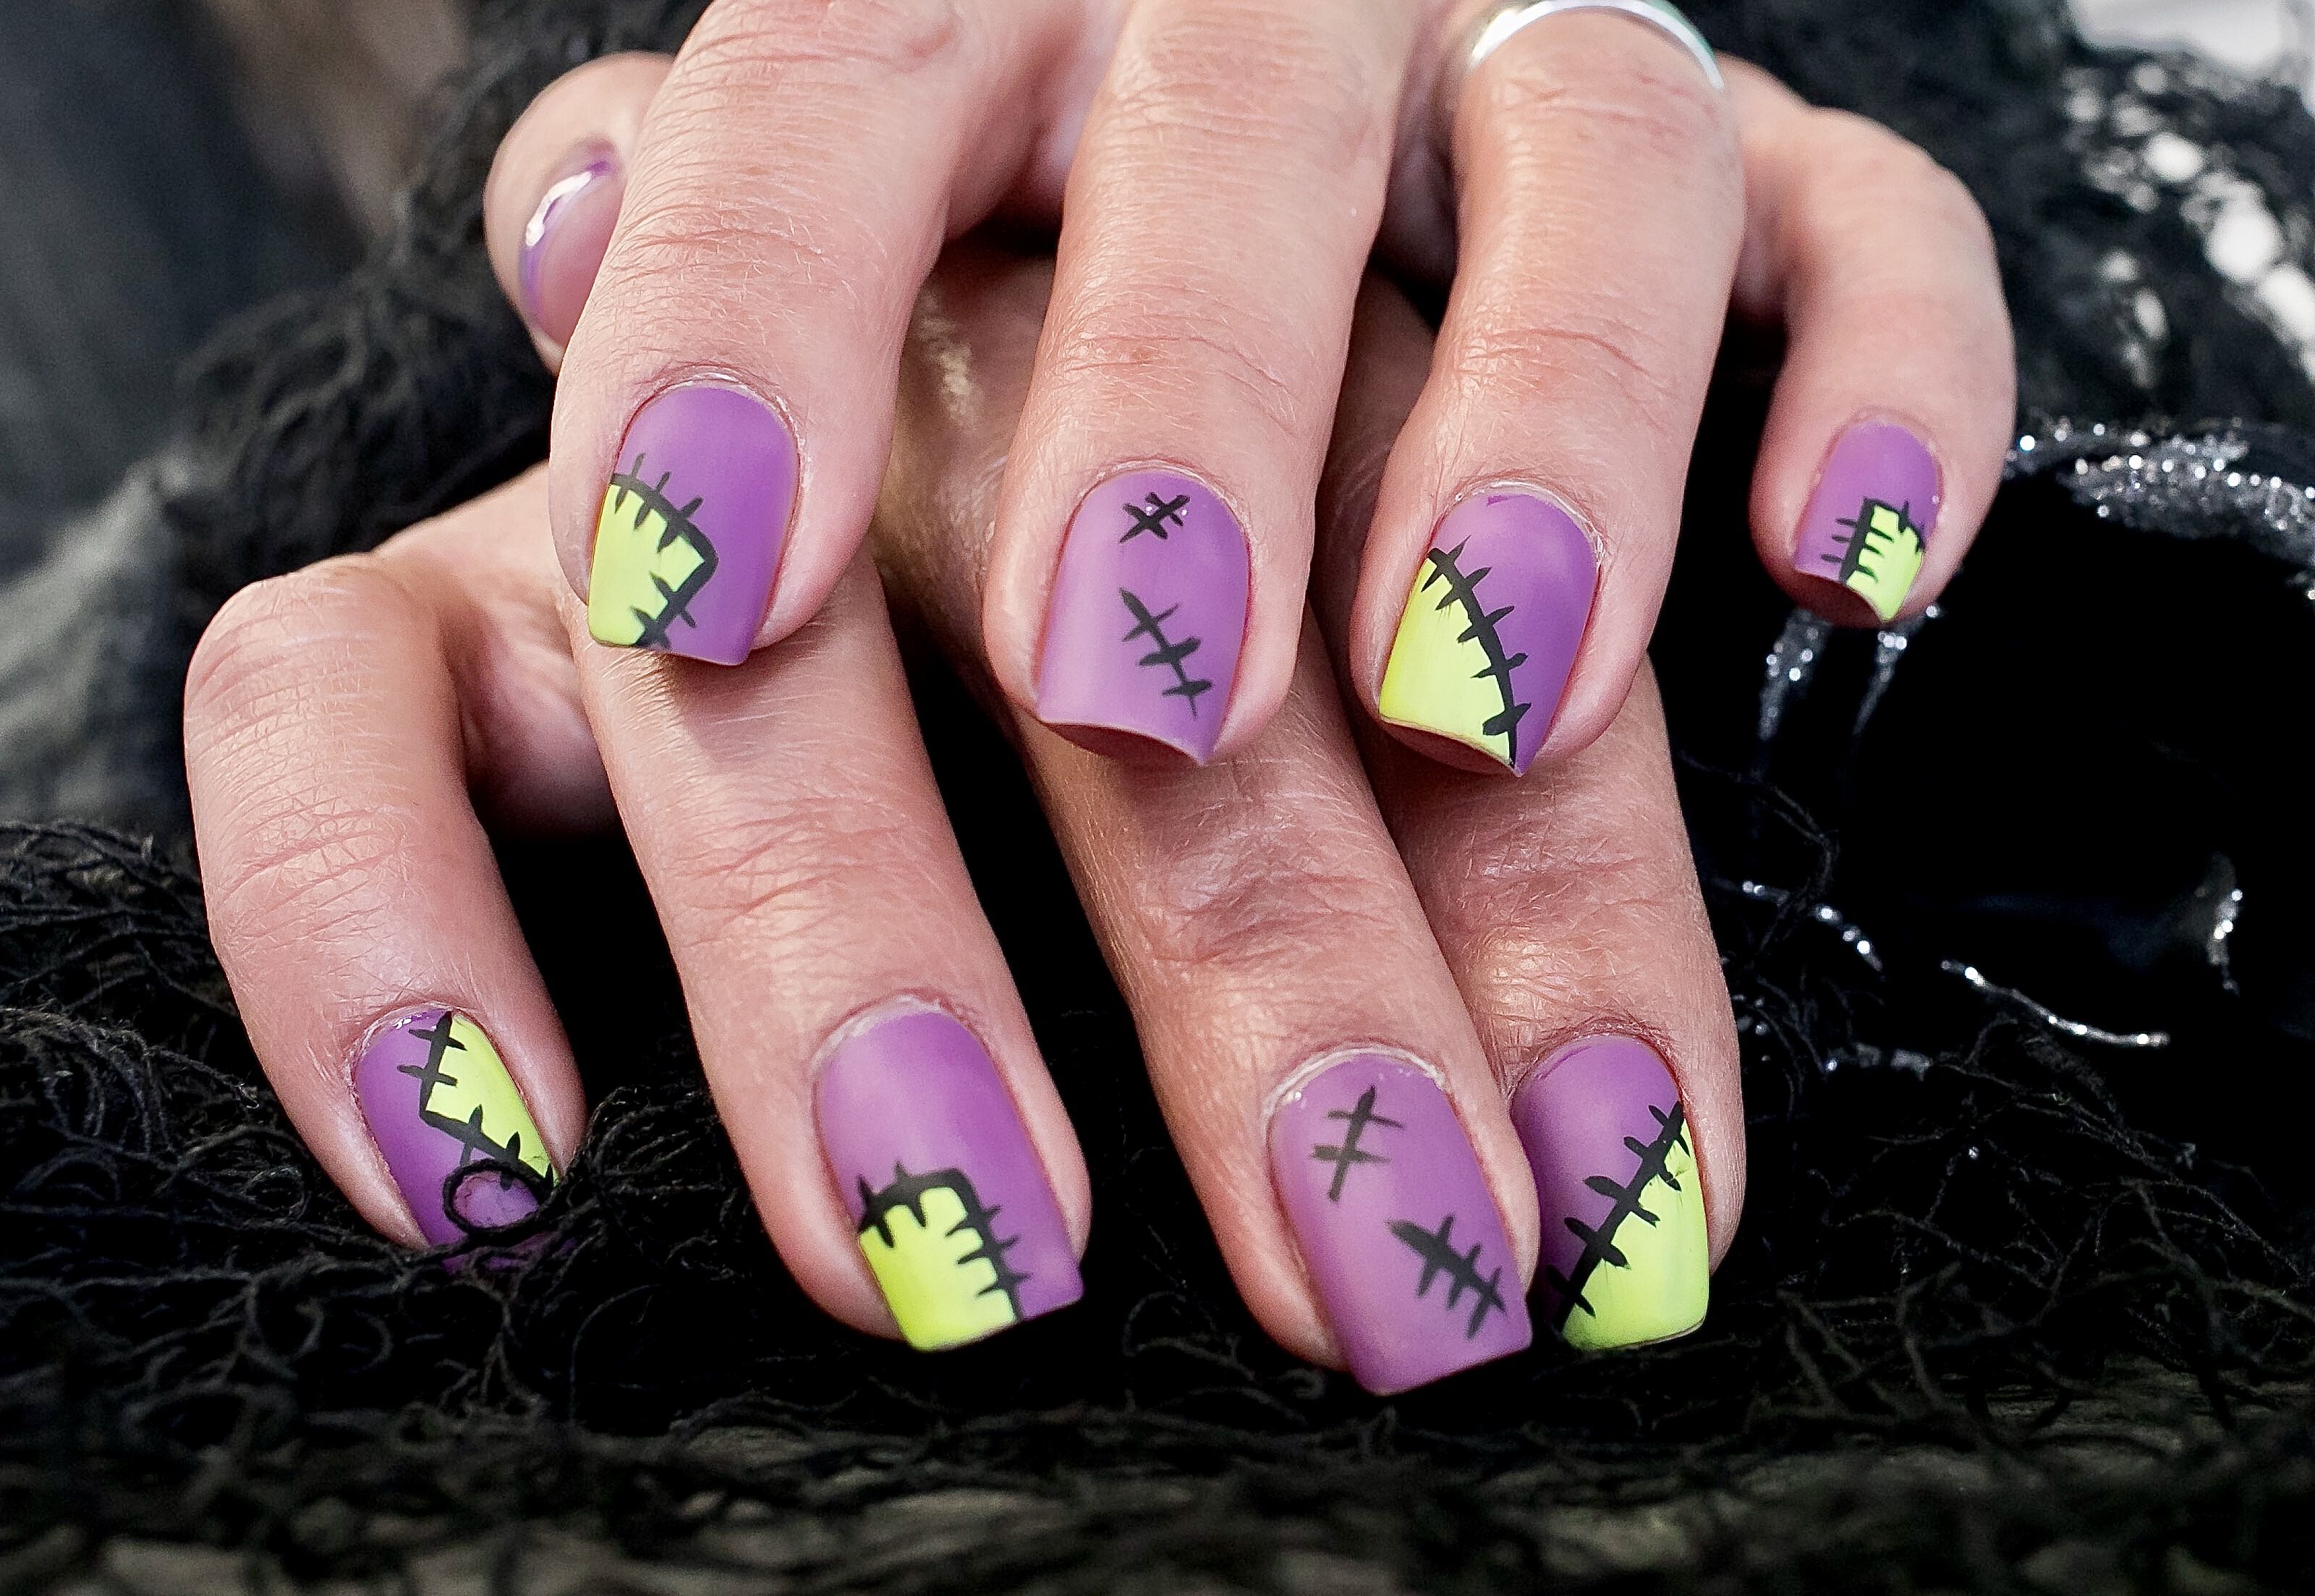 100+ Gel Nail Designs, Best Nails for the best moments